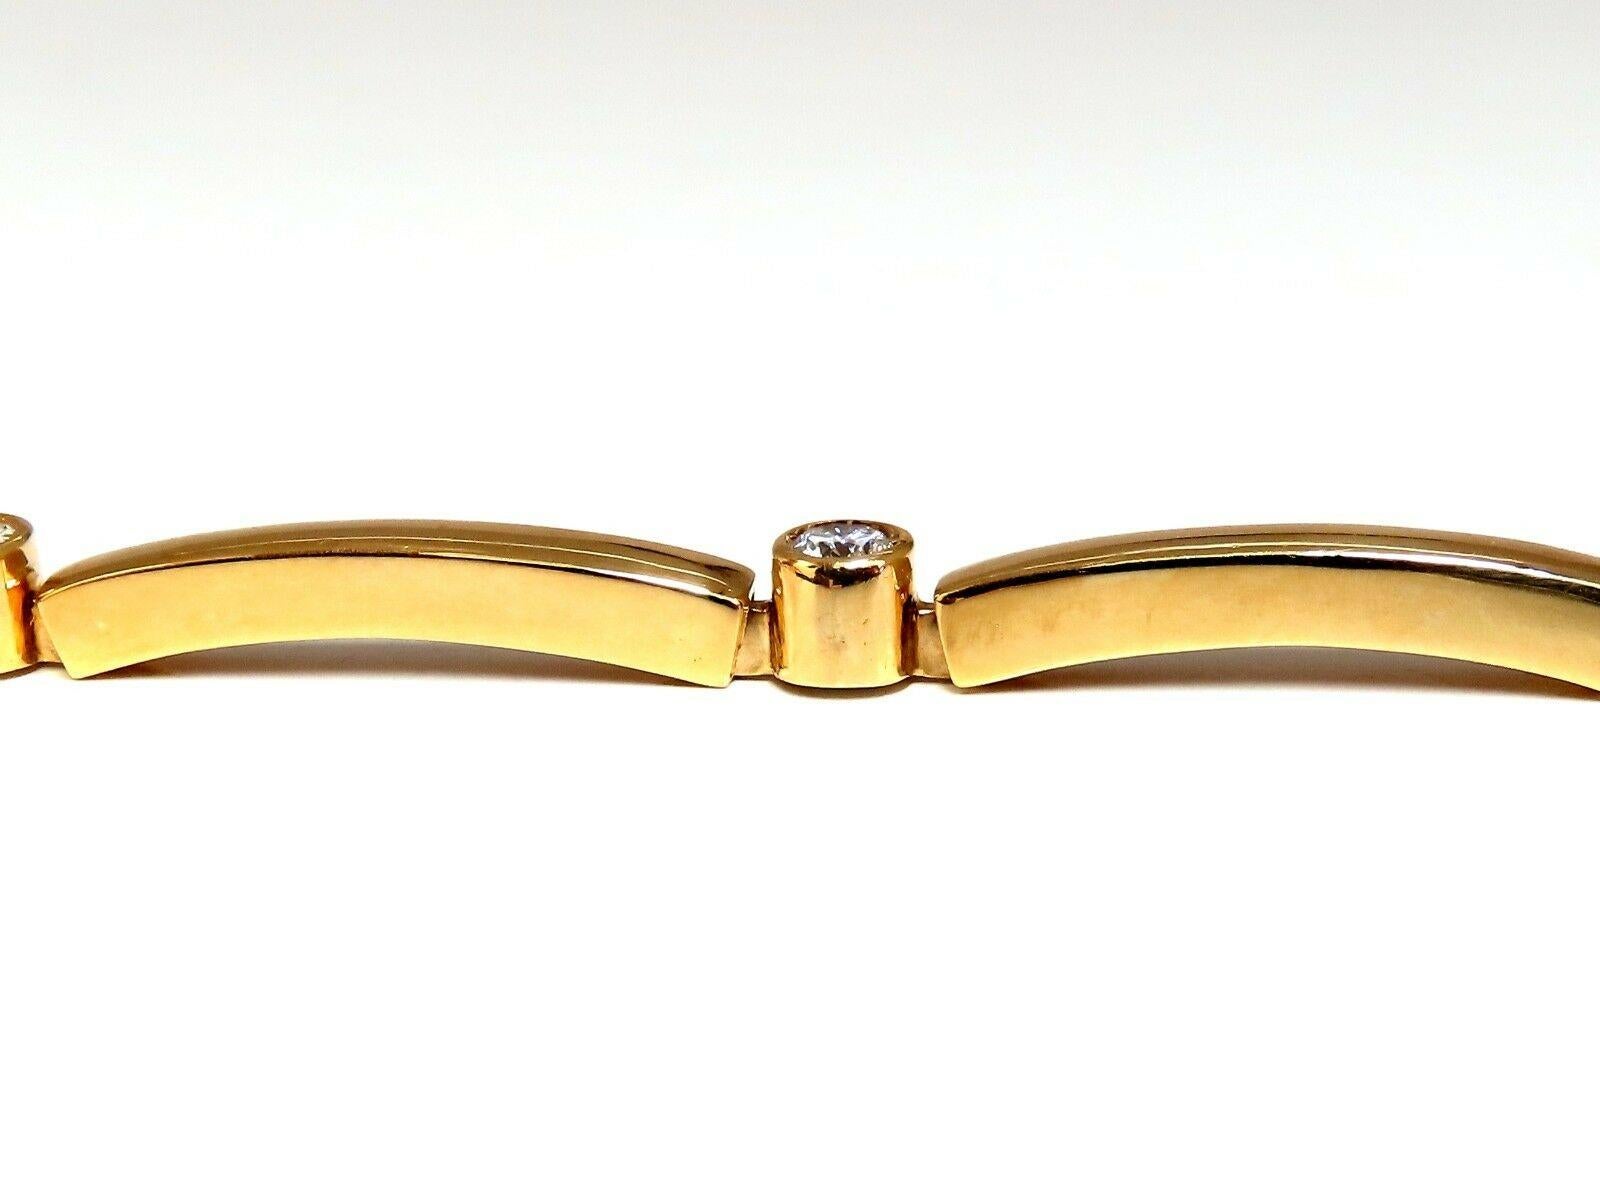 Smooth High Shine Arch Link Bracelet
.80ct. natural diamonds.

Rounds, Full cut brilliants

G colors Vs-2 clarity.

14kt. yellow gold

10.1 Grams.

7 Inches long (wearable length)

3.8mm wide

pressure clasp and safety catch 

$6000 Appraisal